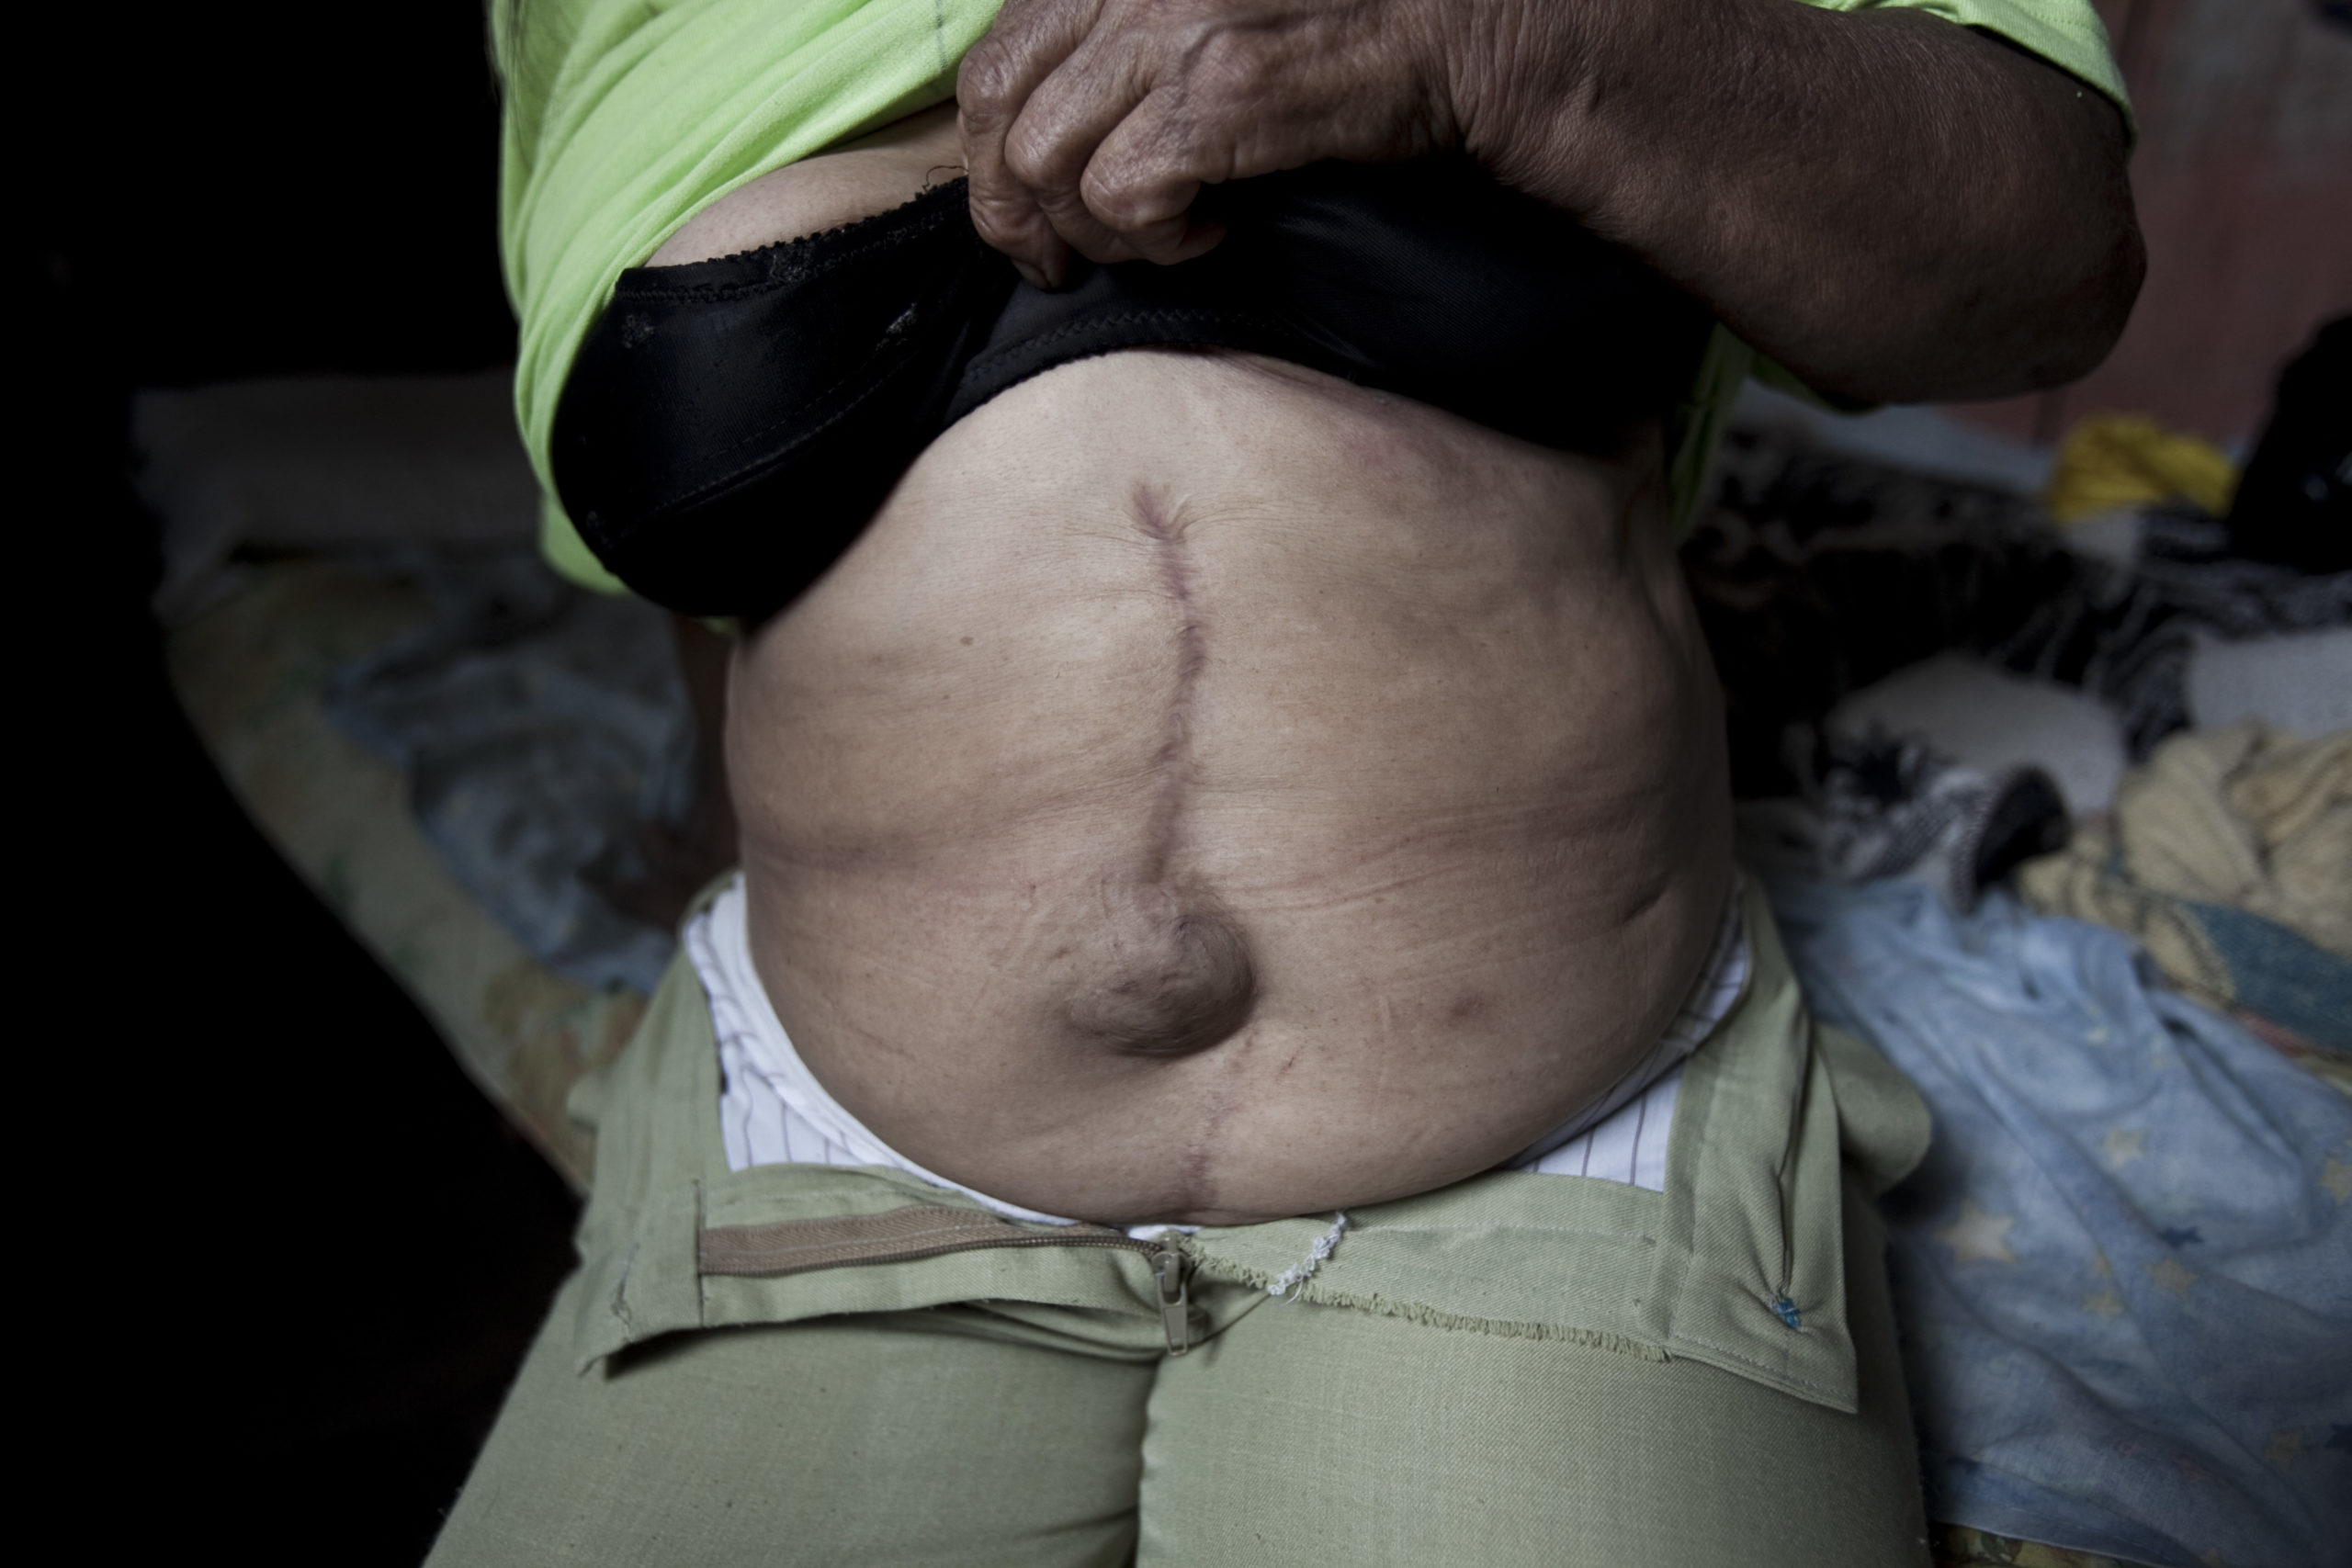 In a photo from 2010, Alba Cueran Pozos, then 65, shows the scars from cancerous tumours she had removed. She lived in the contaminated area of the rainforest for over 40 years.  (Photo: Amazon Watch)